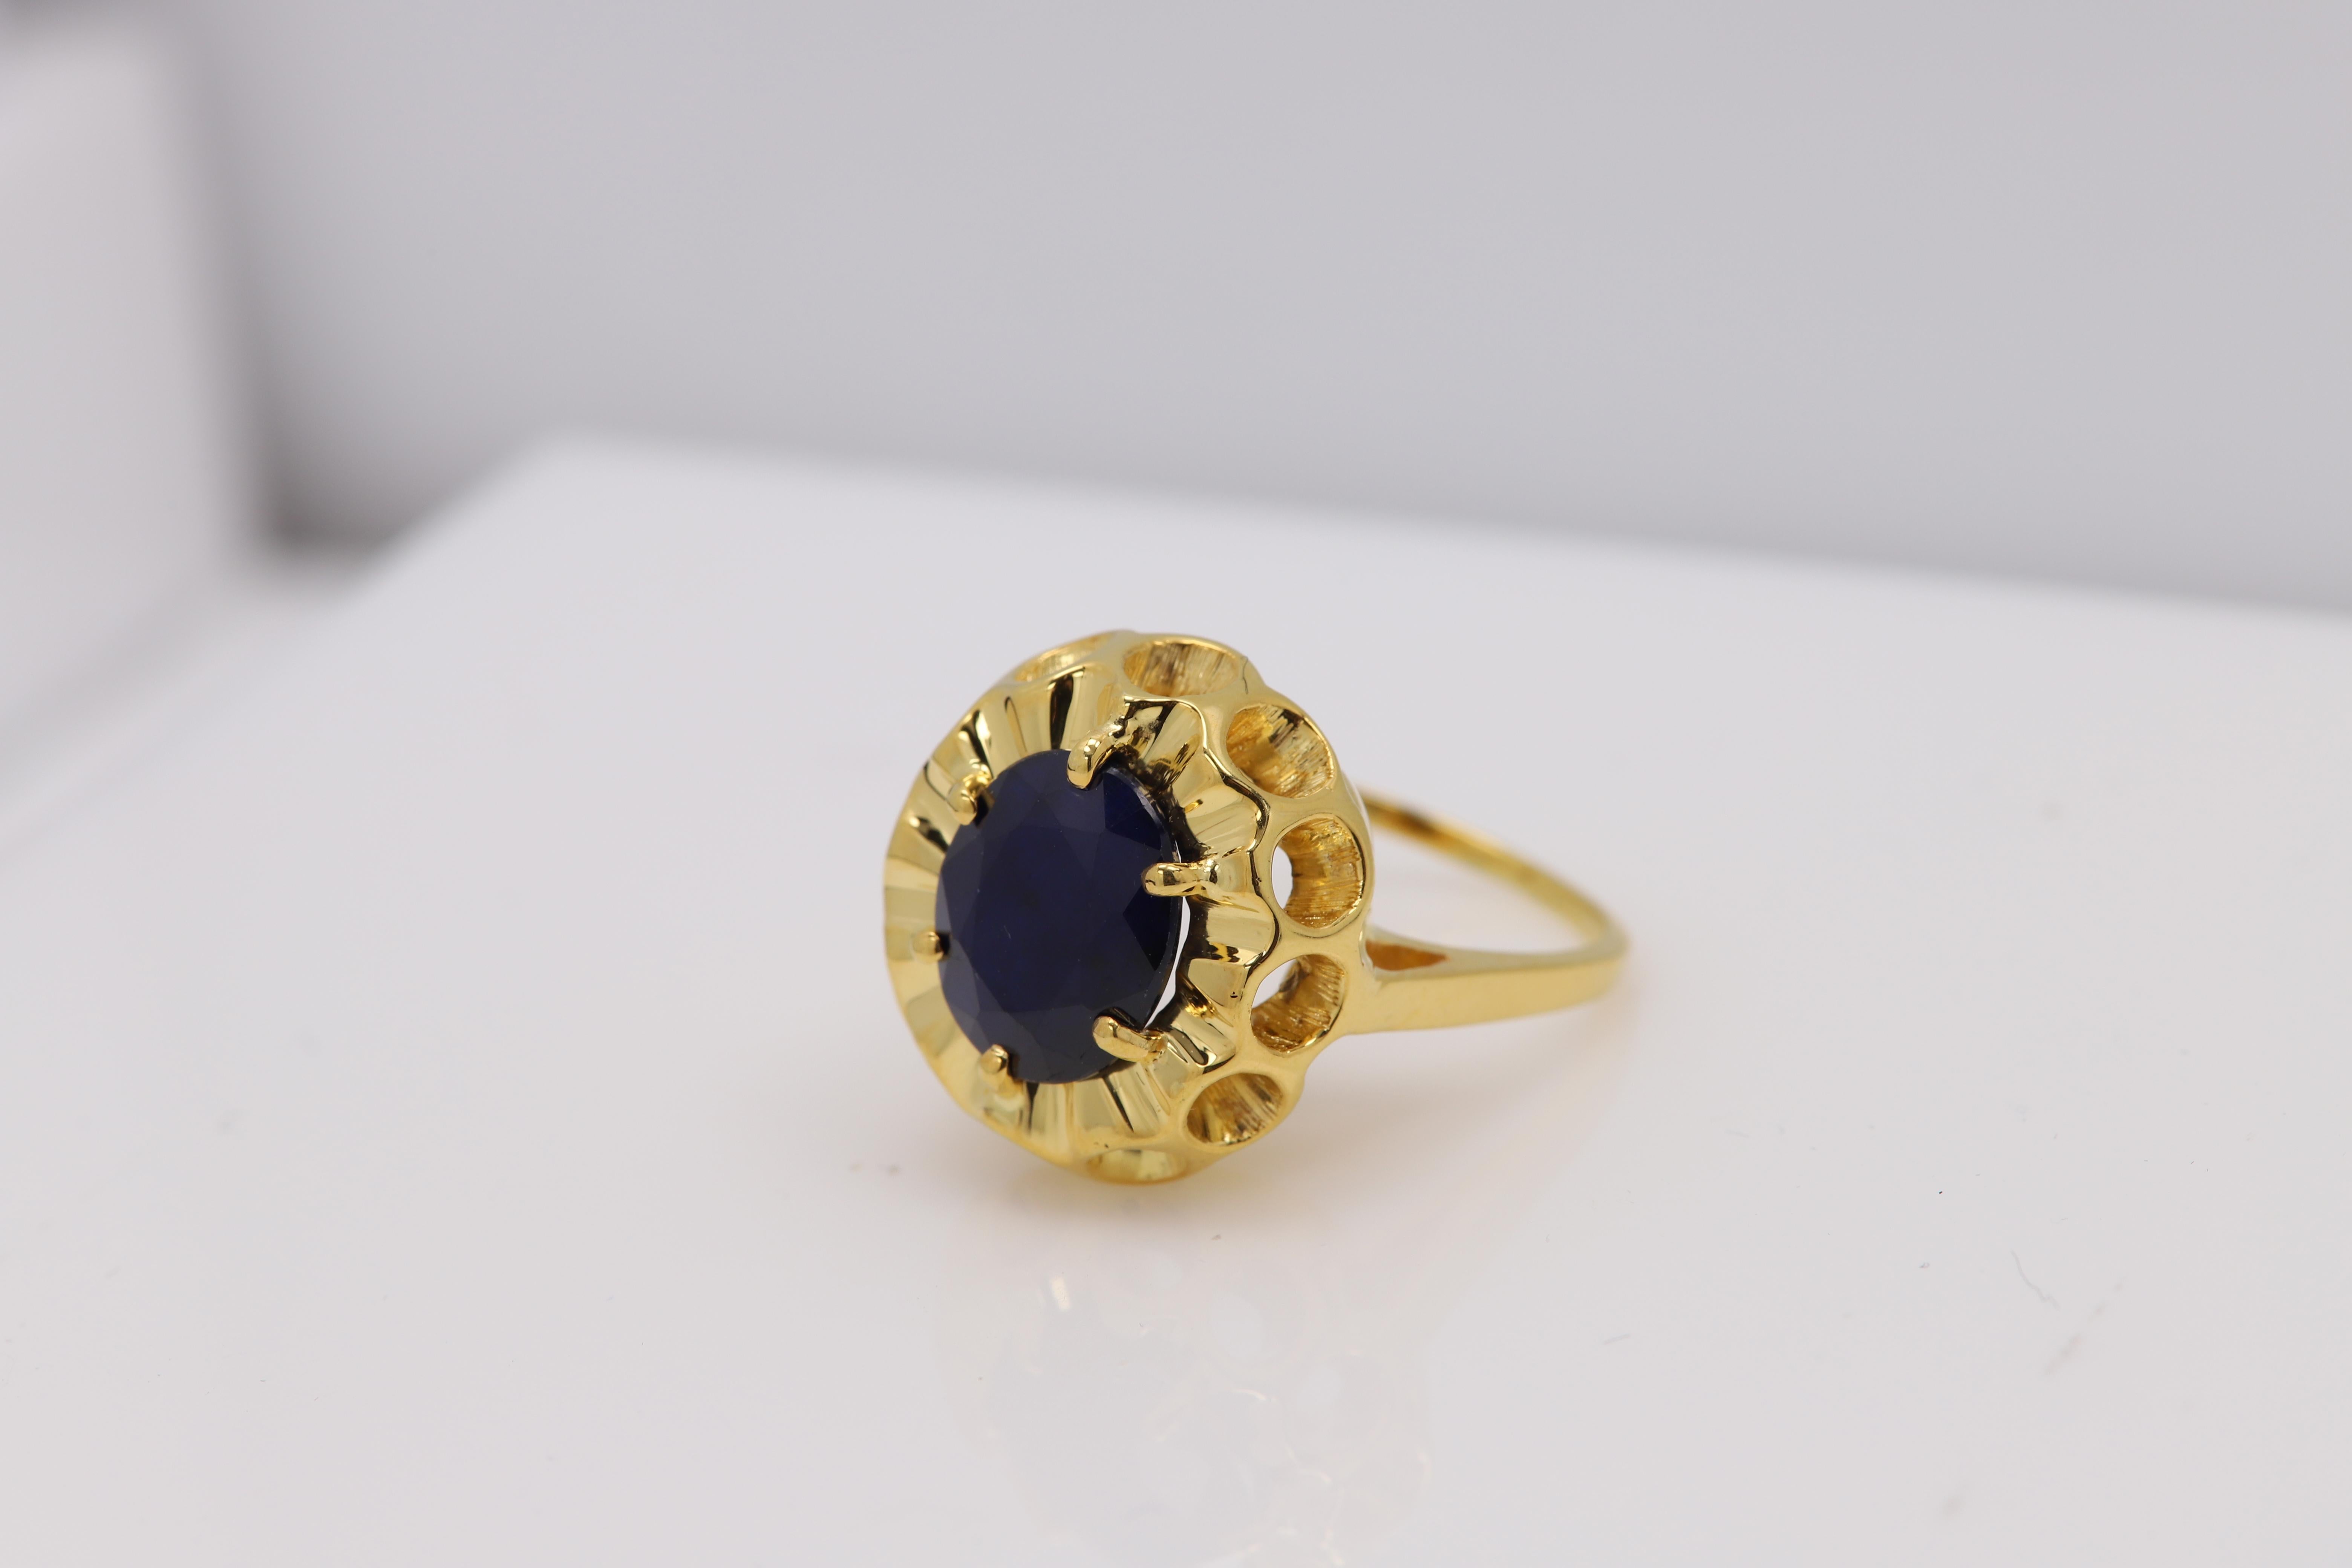 Vintage Large Oval Sapphire Ring 14 Karat Yellow Gold Circa 1940's In Excellent Condition For Sale In Brooklyn, NY